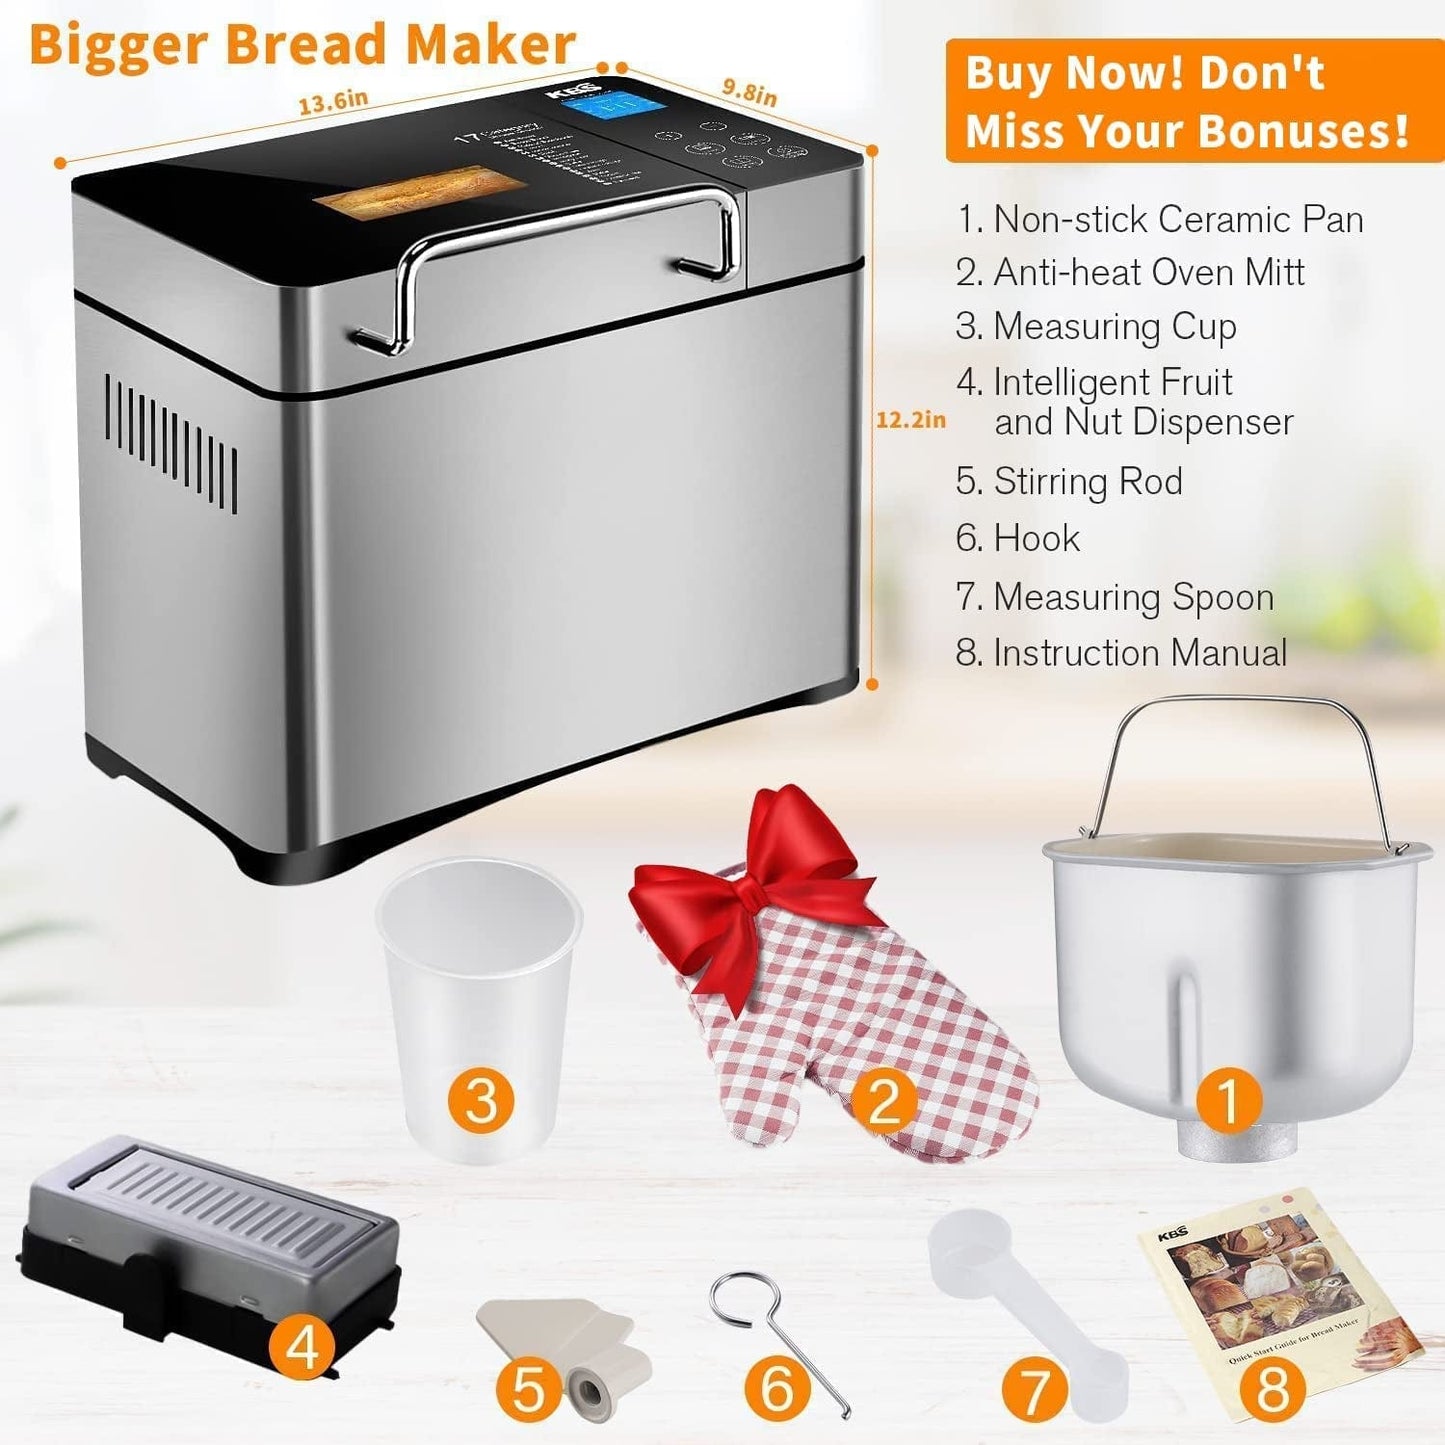 https://kol.pet/cdn/shop/products/kbs-large-17-in-1-bread-machine-2lb-all-stainless-steel-bread-maker-with-auto-fruit-nut-dispenser-nonstick-ceramic-pan-full-touch-panel-tempered-glass-reserve-keep-warm-set-oven-mitt_d8048bdb-c8c1-4eb2-9d53-831e596535e2_1445x.jpg?v=1675557547